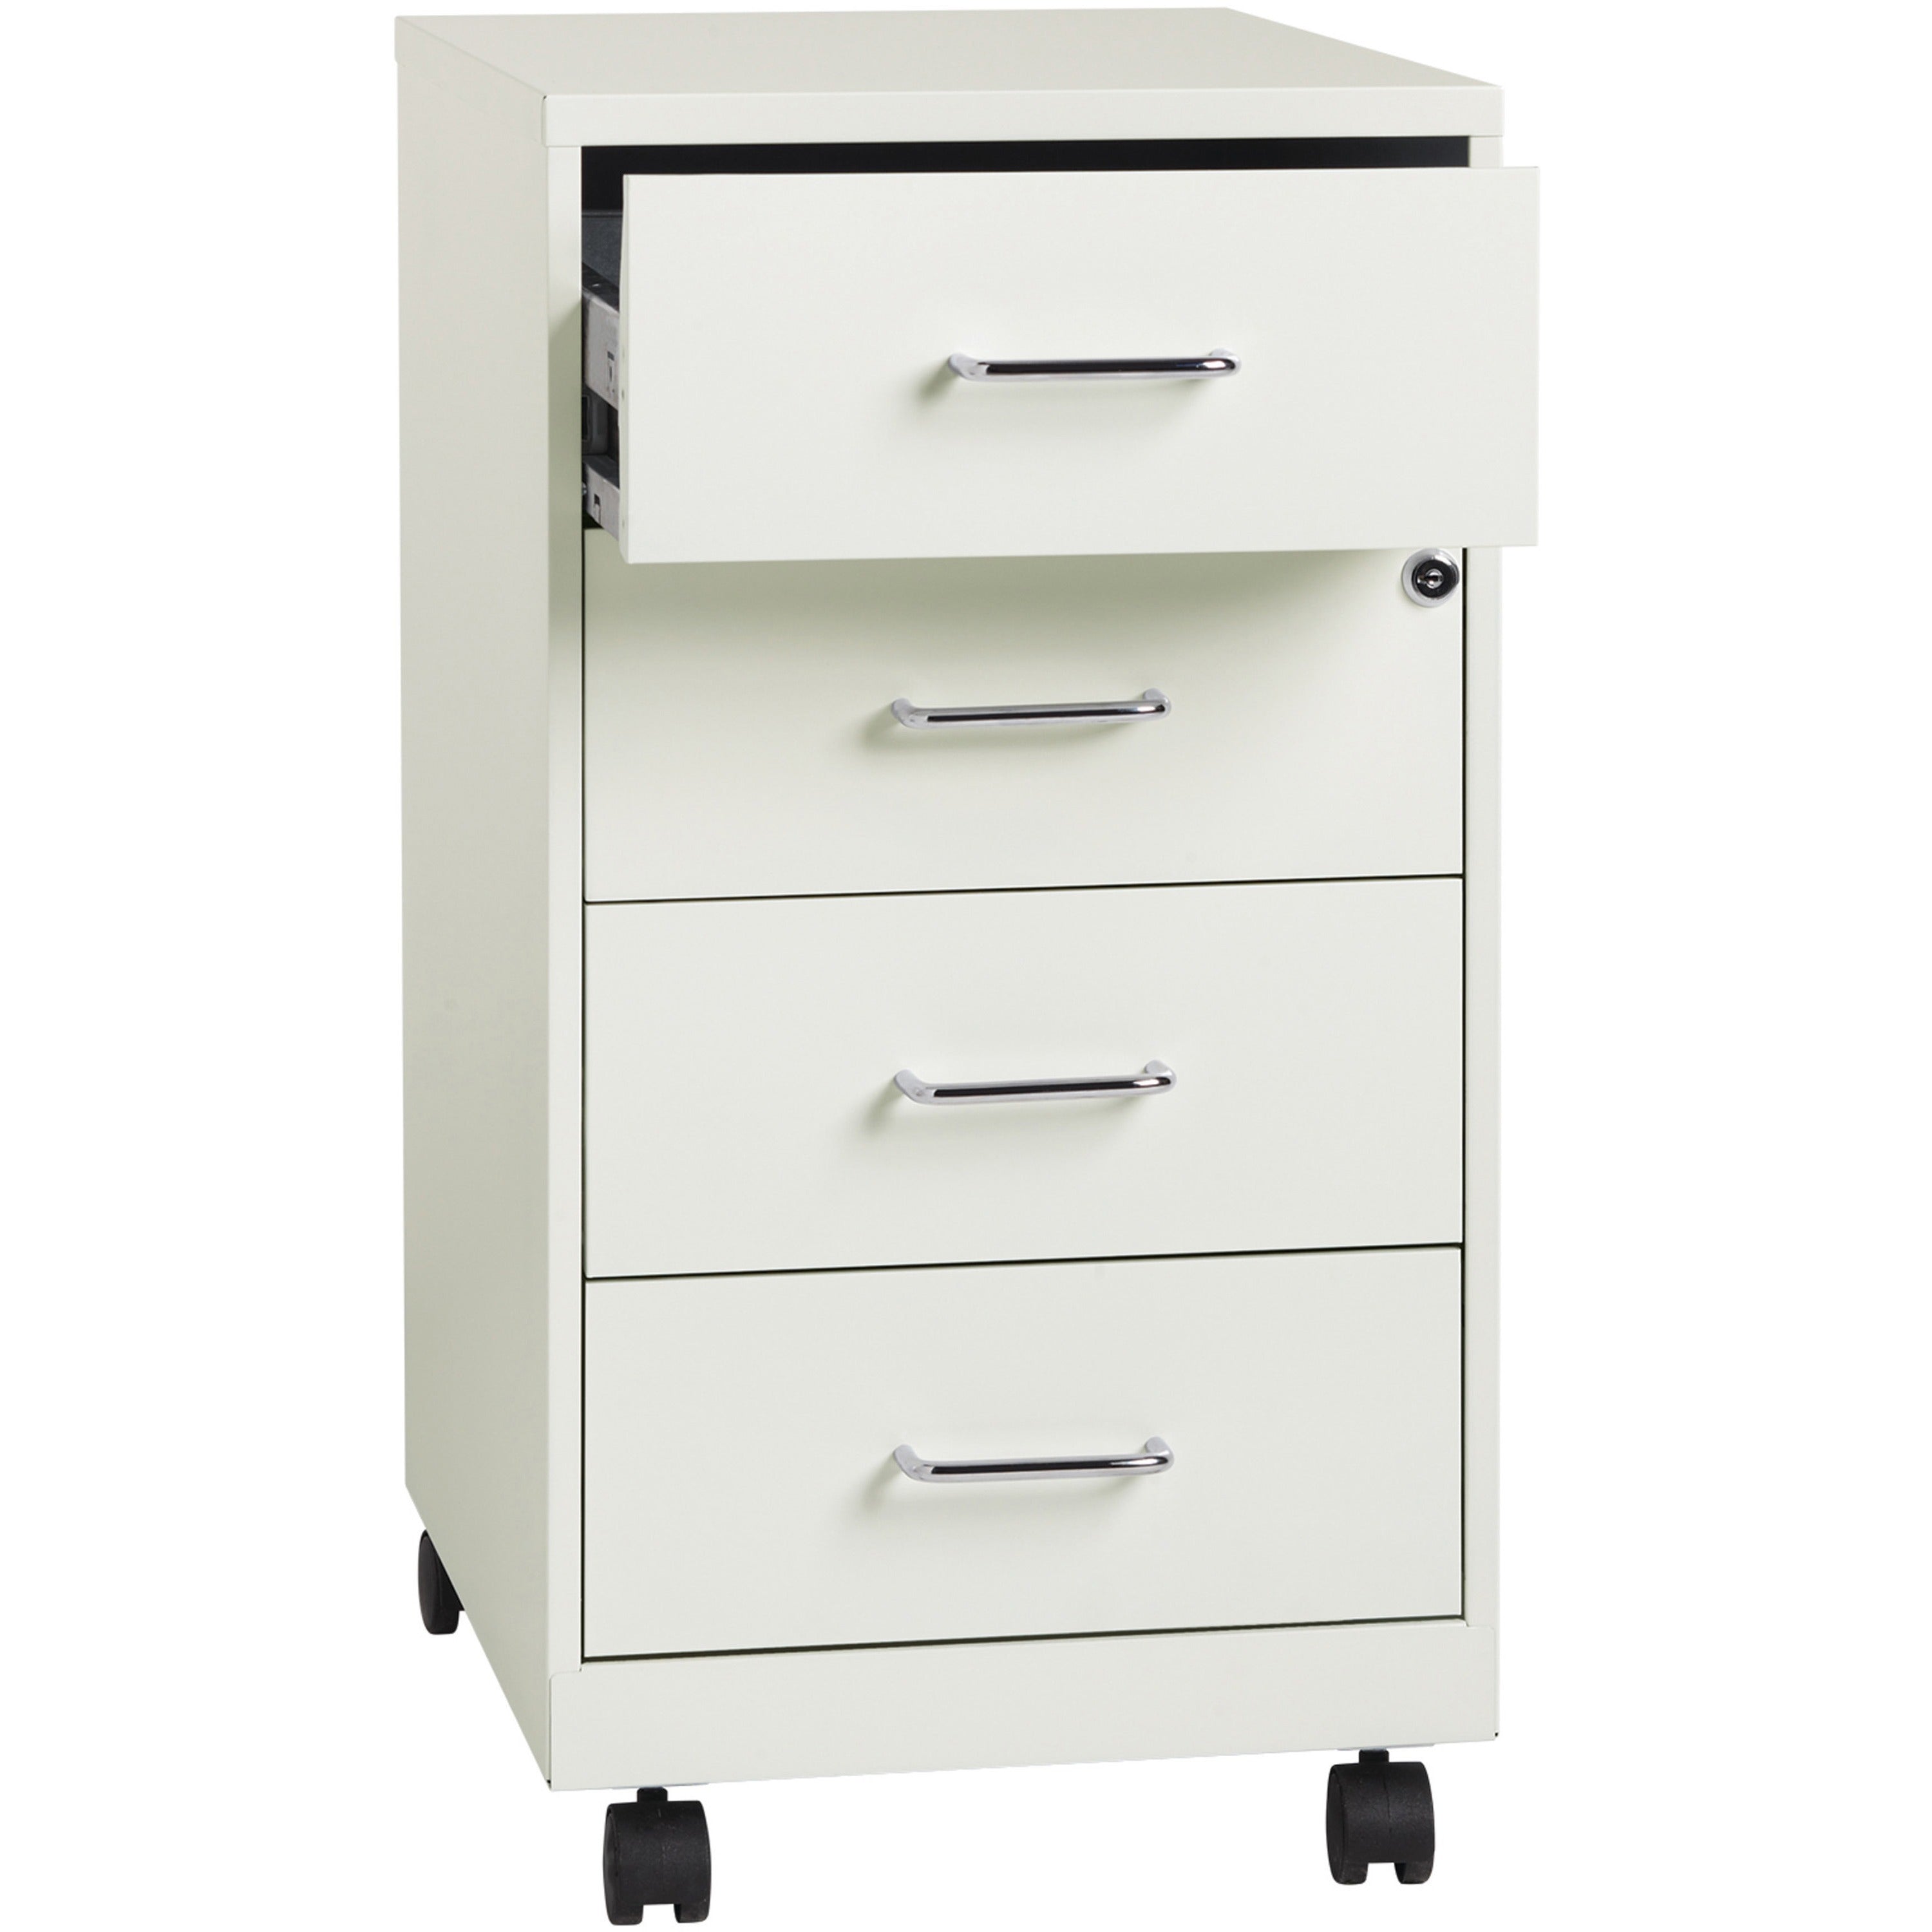 nusparc-mobile-storage-cabinet-142-x-18-x-265-4-x-drawers-letter-legal-mobility-glide-suspension-anti-tip-nonporous-surface-cam-lock-3-4-drawer-extension-white-painted-steel-recycled_nprvf418dmwe - 4